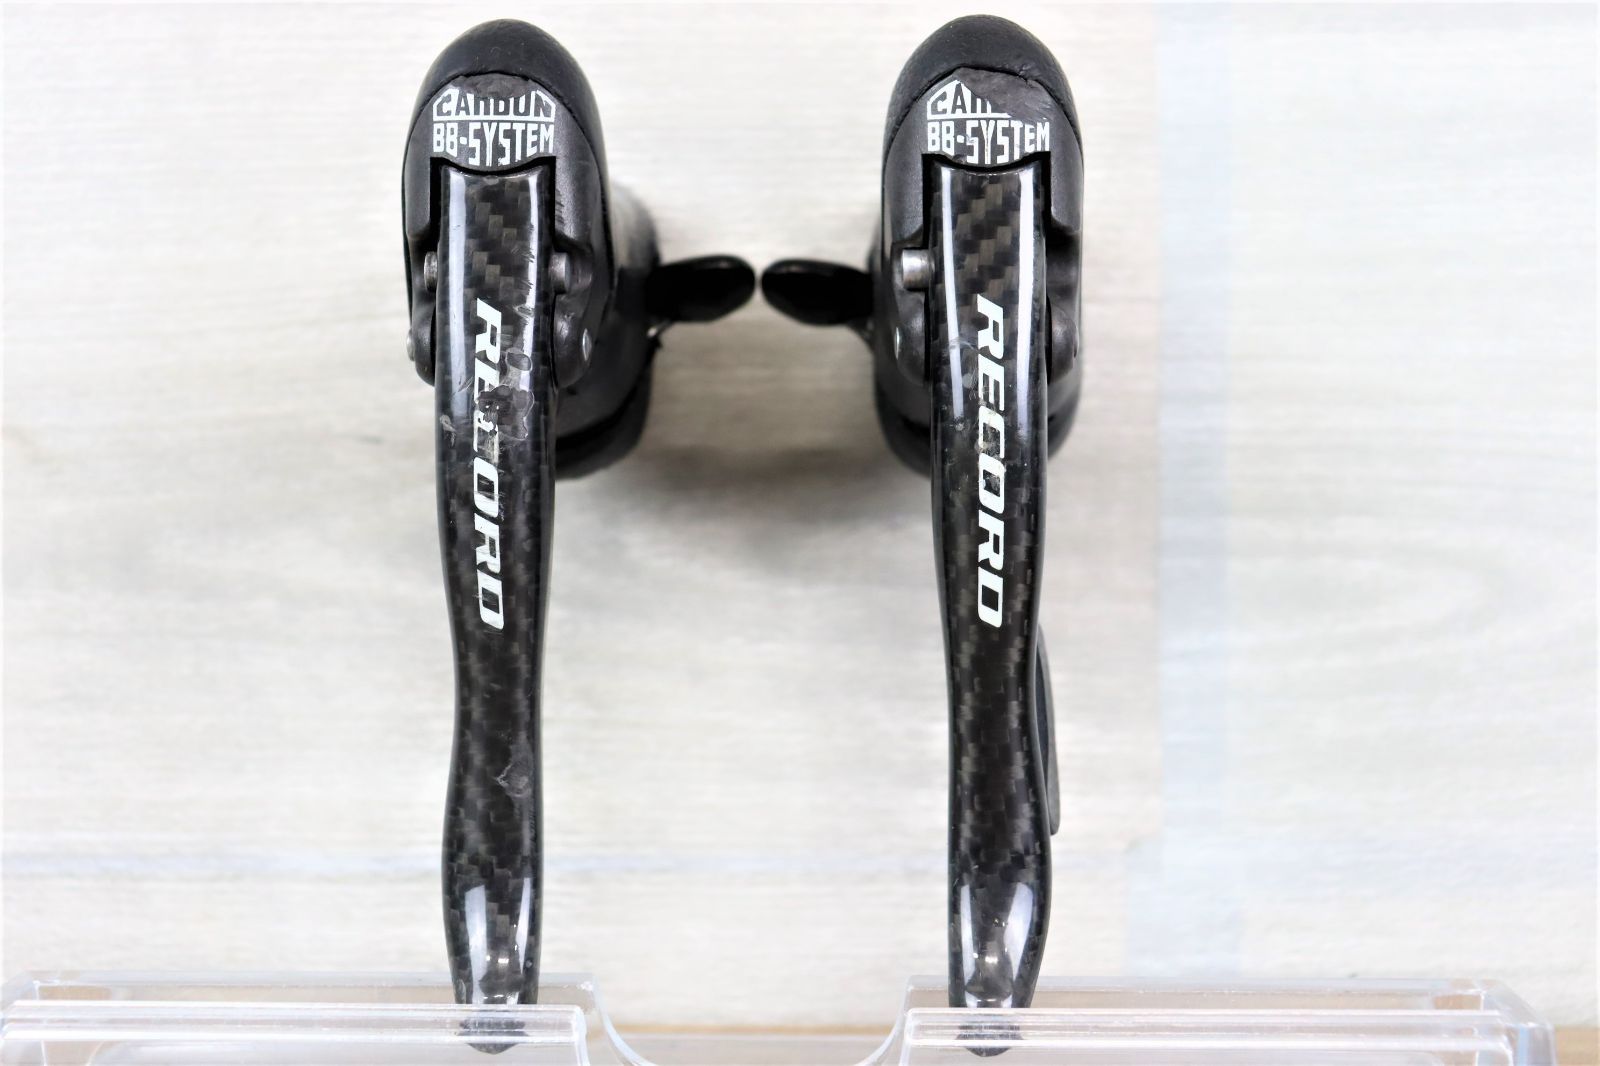 42 Campagnolo RECORD CARBON BB-SYSTEM カンパニョーロ レコード